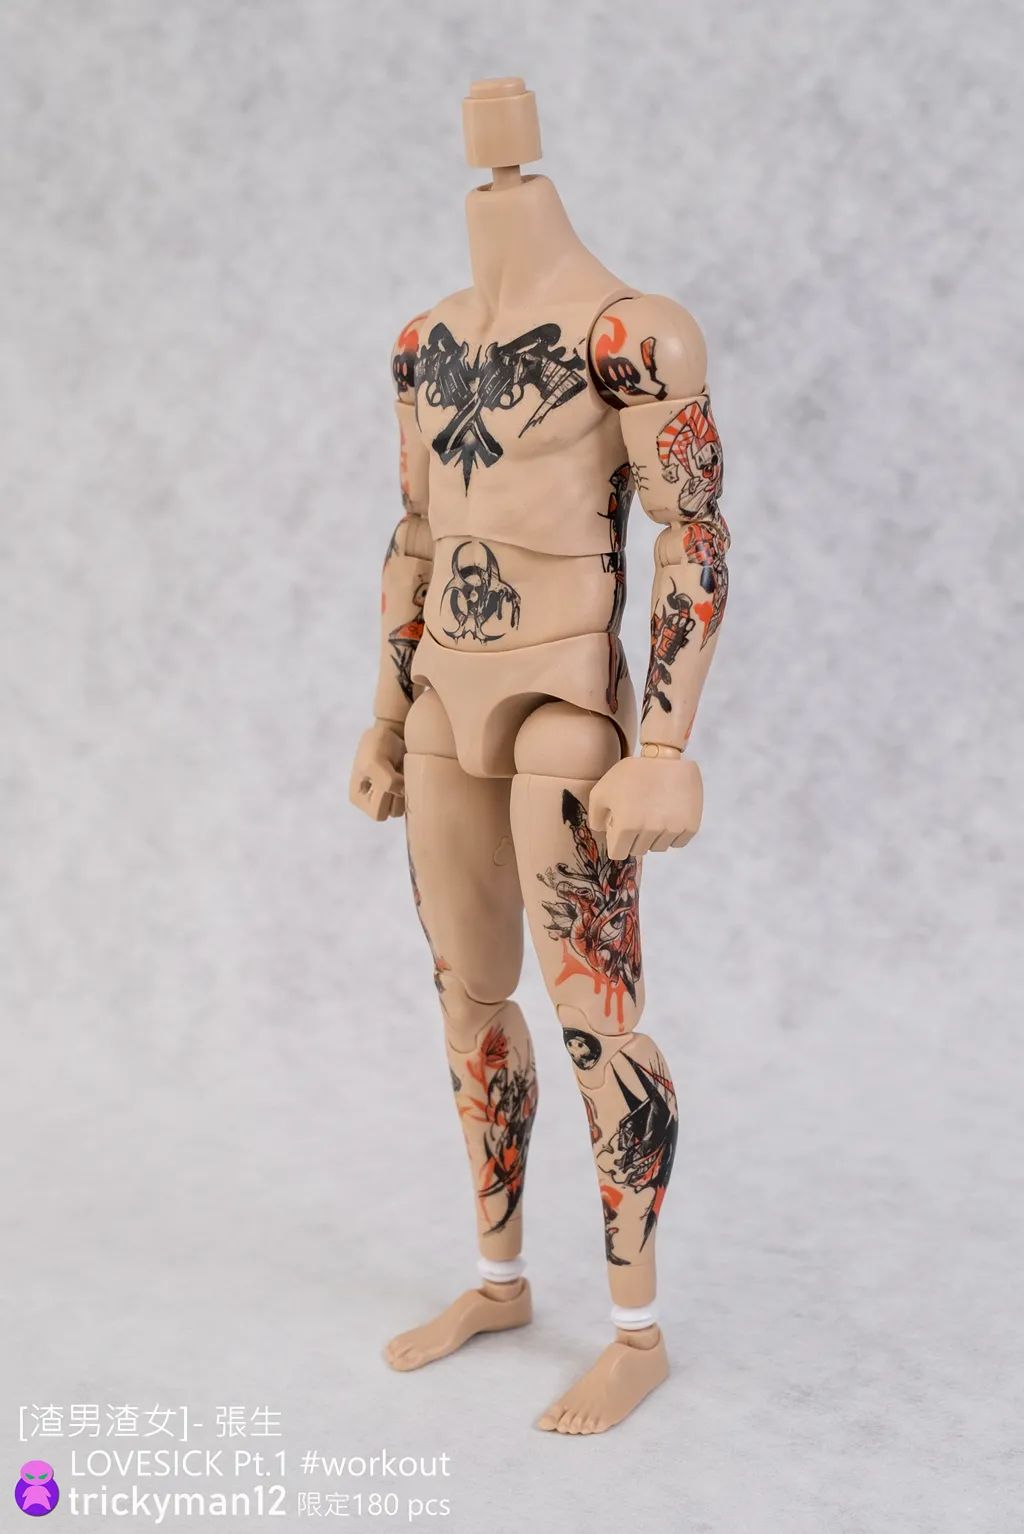 ScumbagSeries - NEW PRODUCT: Trickyman12: 1/6 "Scumbag" series - Zhang Sheng LOVESICK Pt.1 action figure 17562611